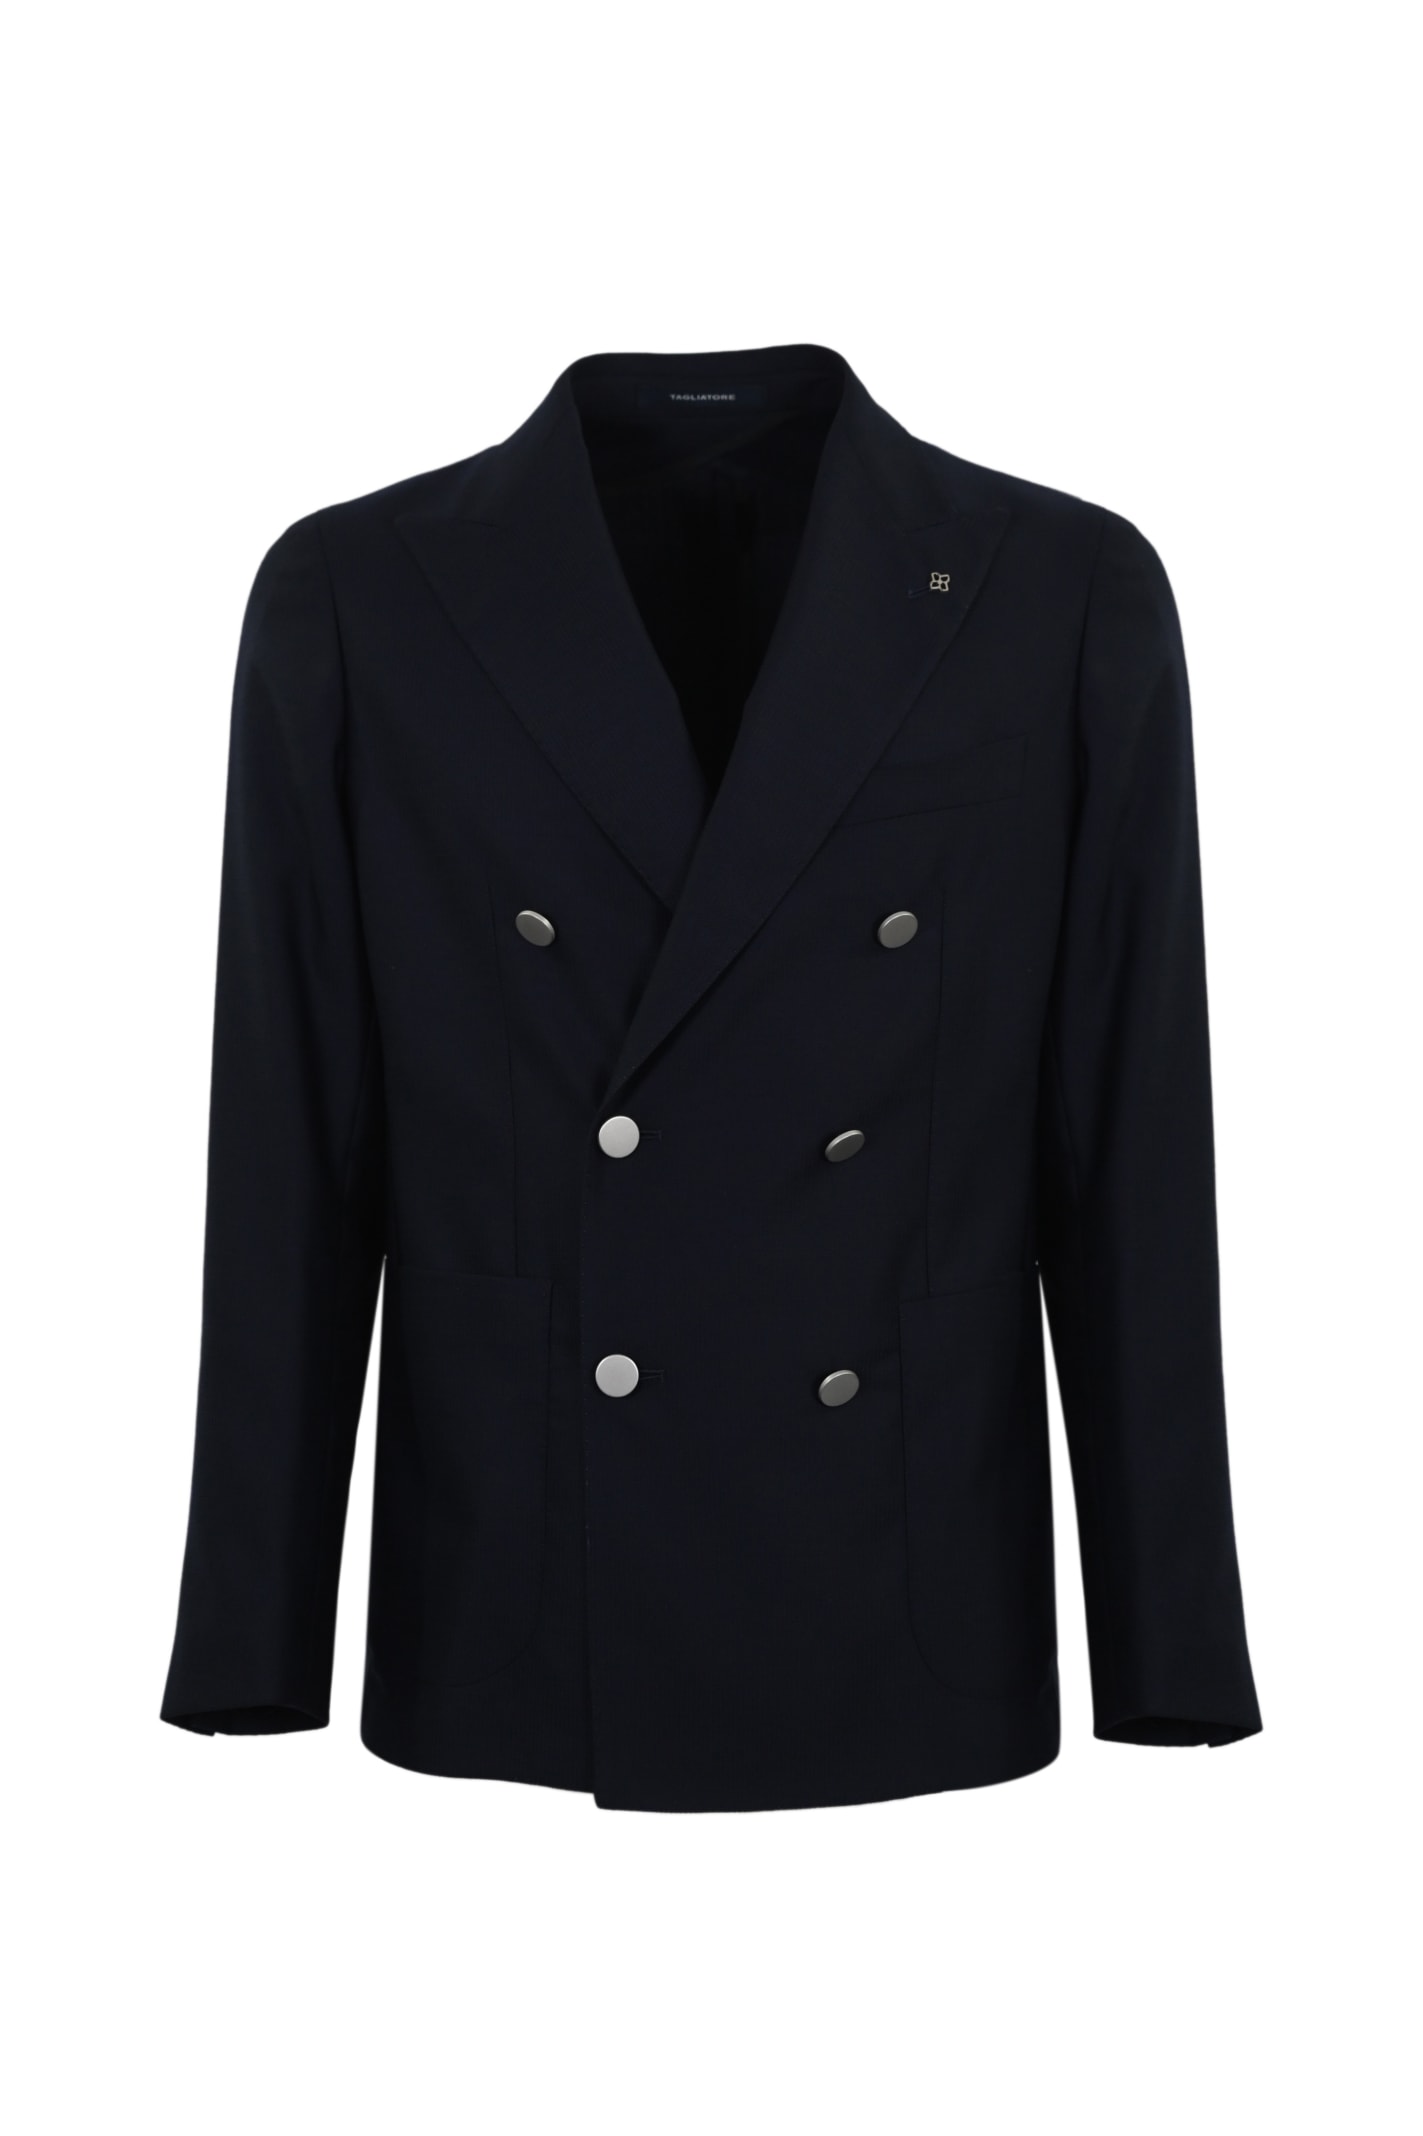 Tagliatore Double-breasted Wool Jacket In Black